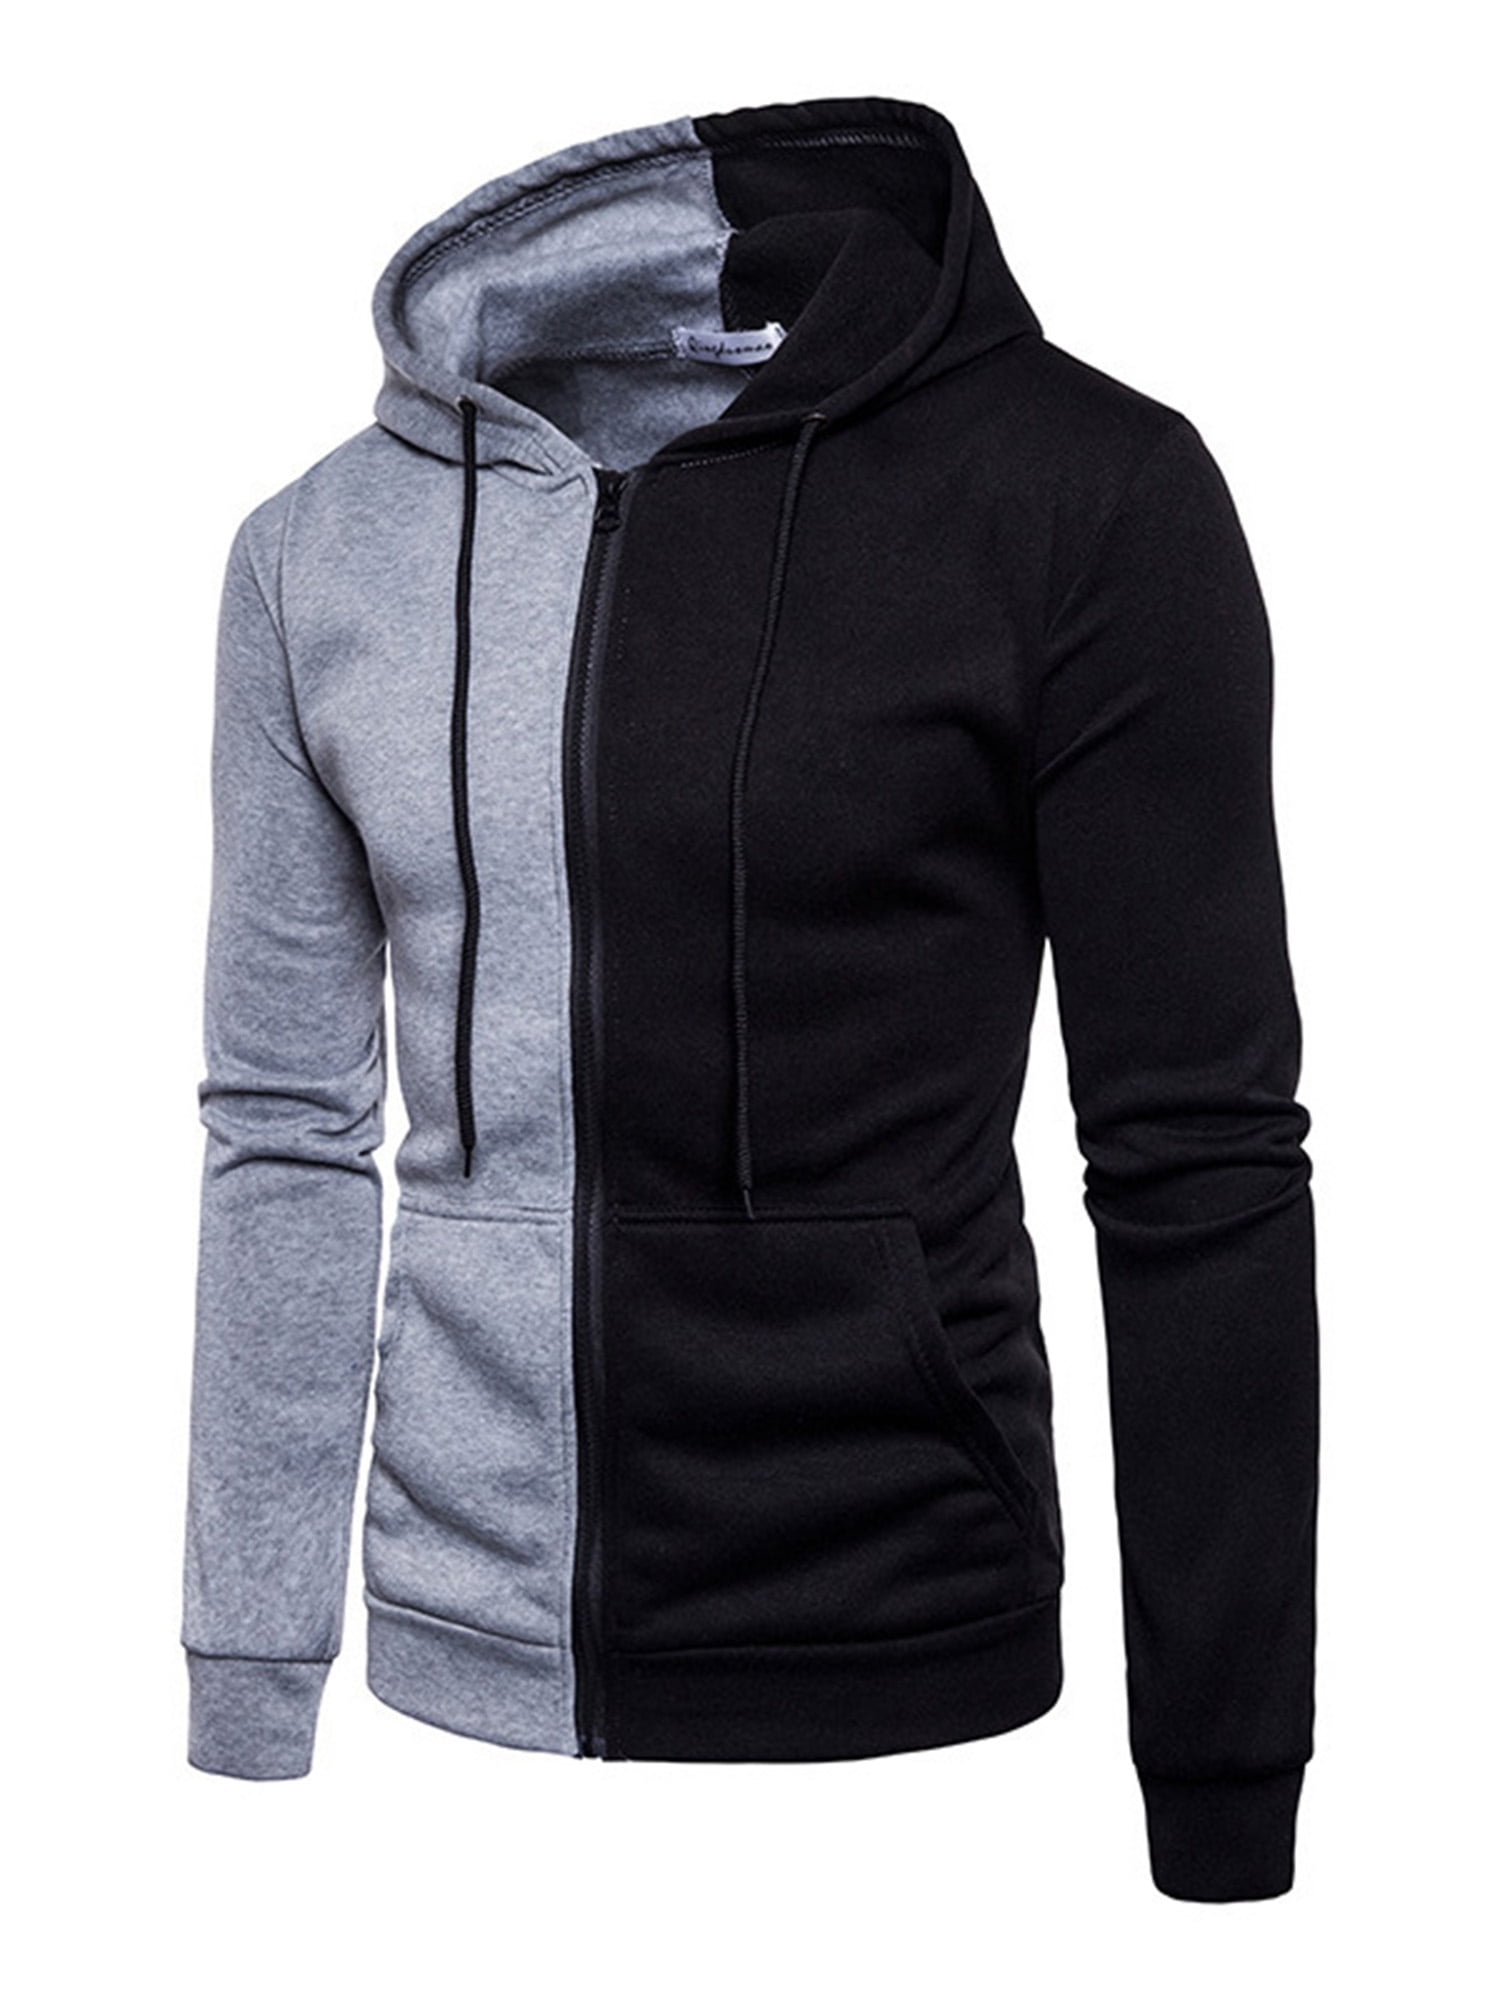 Hooded Sweatshirts Men with Zipper Slim Fit Three-Color Stitching Casual Lightweight Workout Autumn Pullover Hoodie 